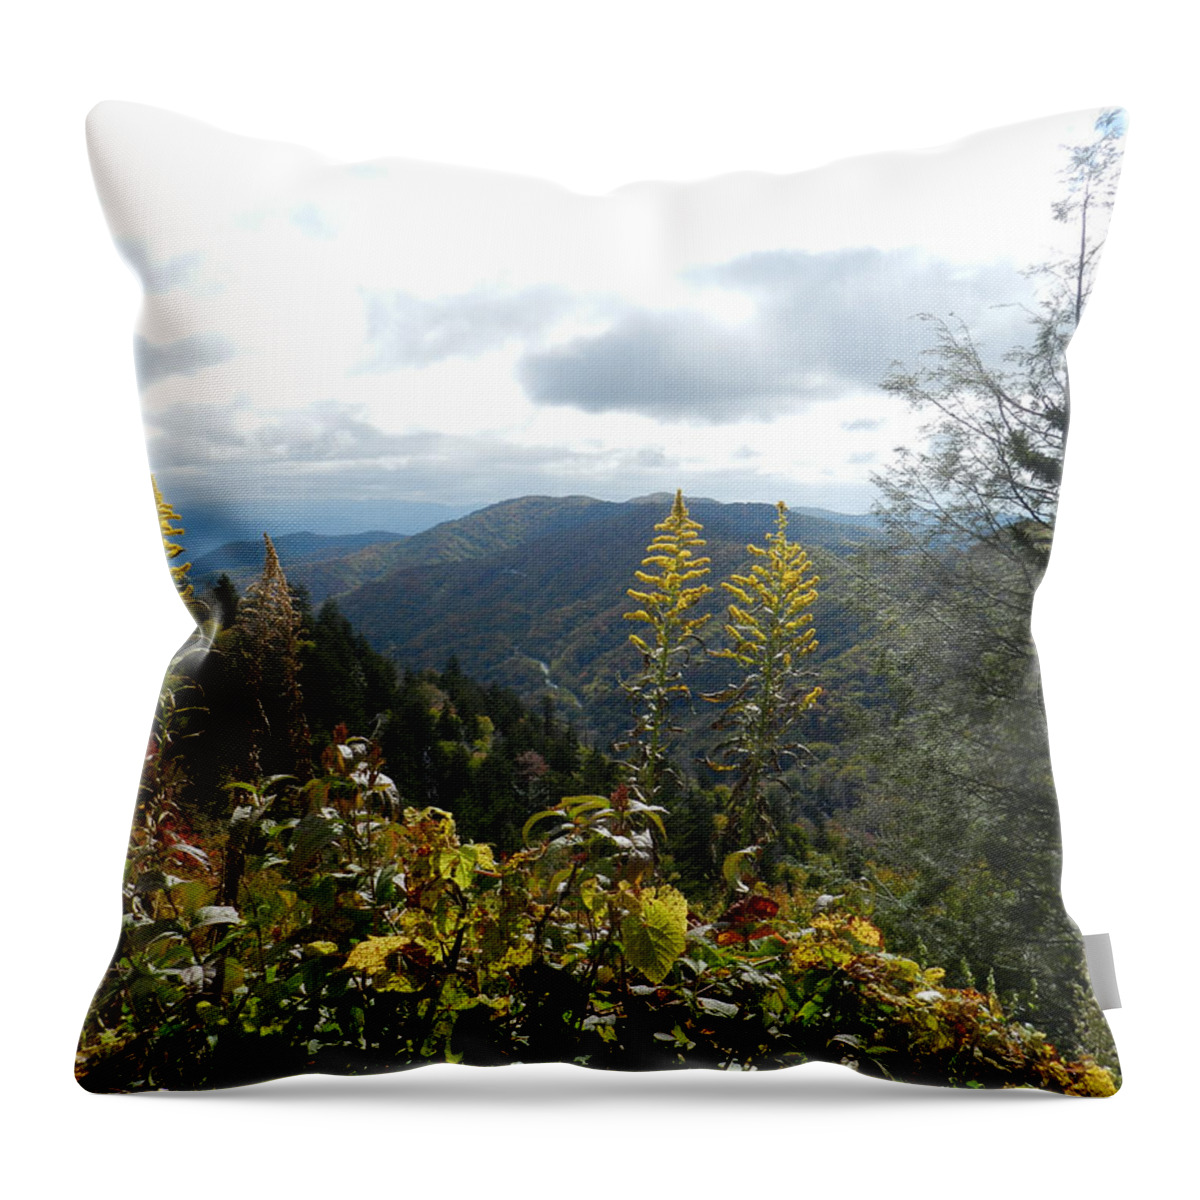 Mountain View Throw Pillow featuring the photograph Golden View by Deborah Ferree